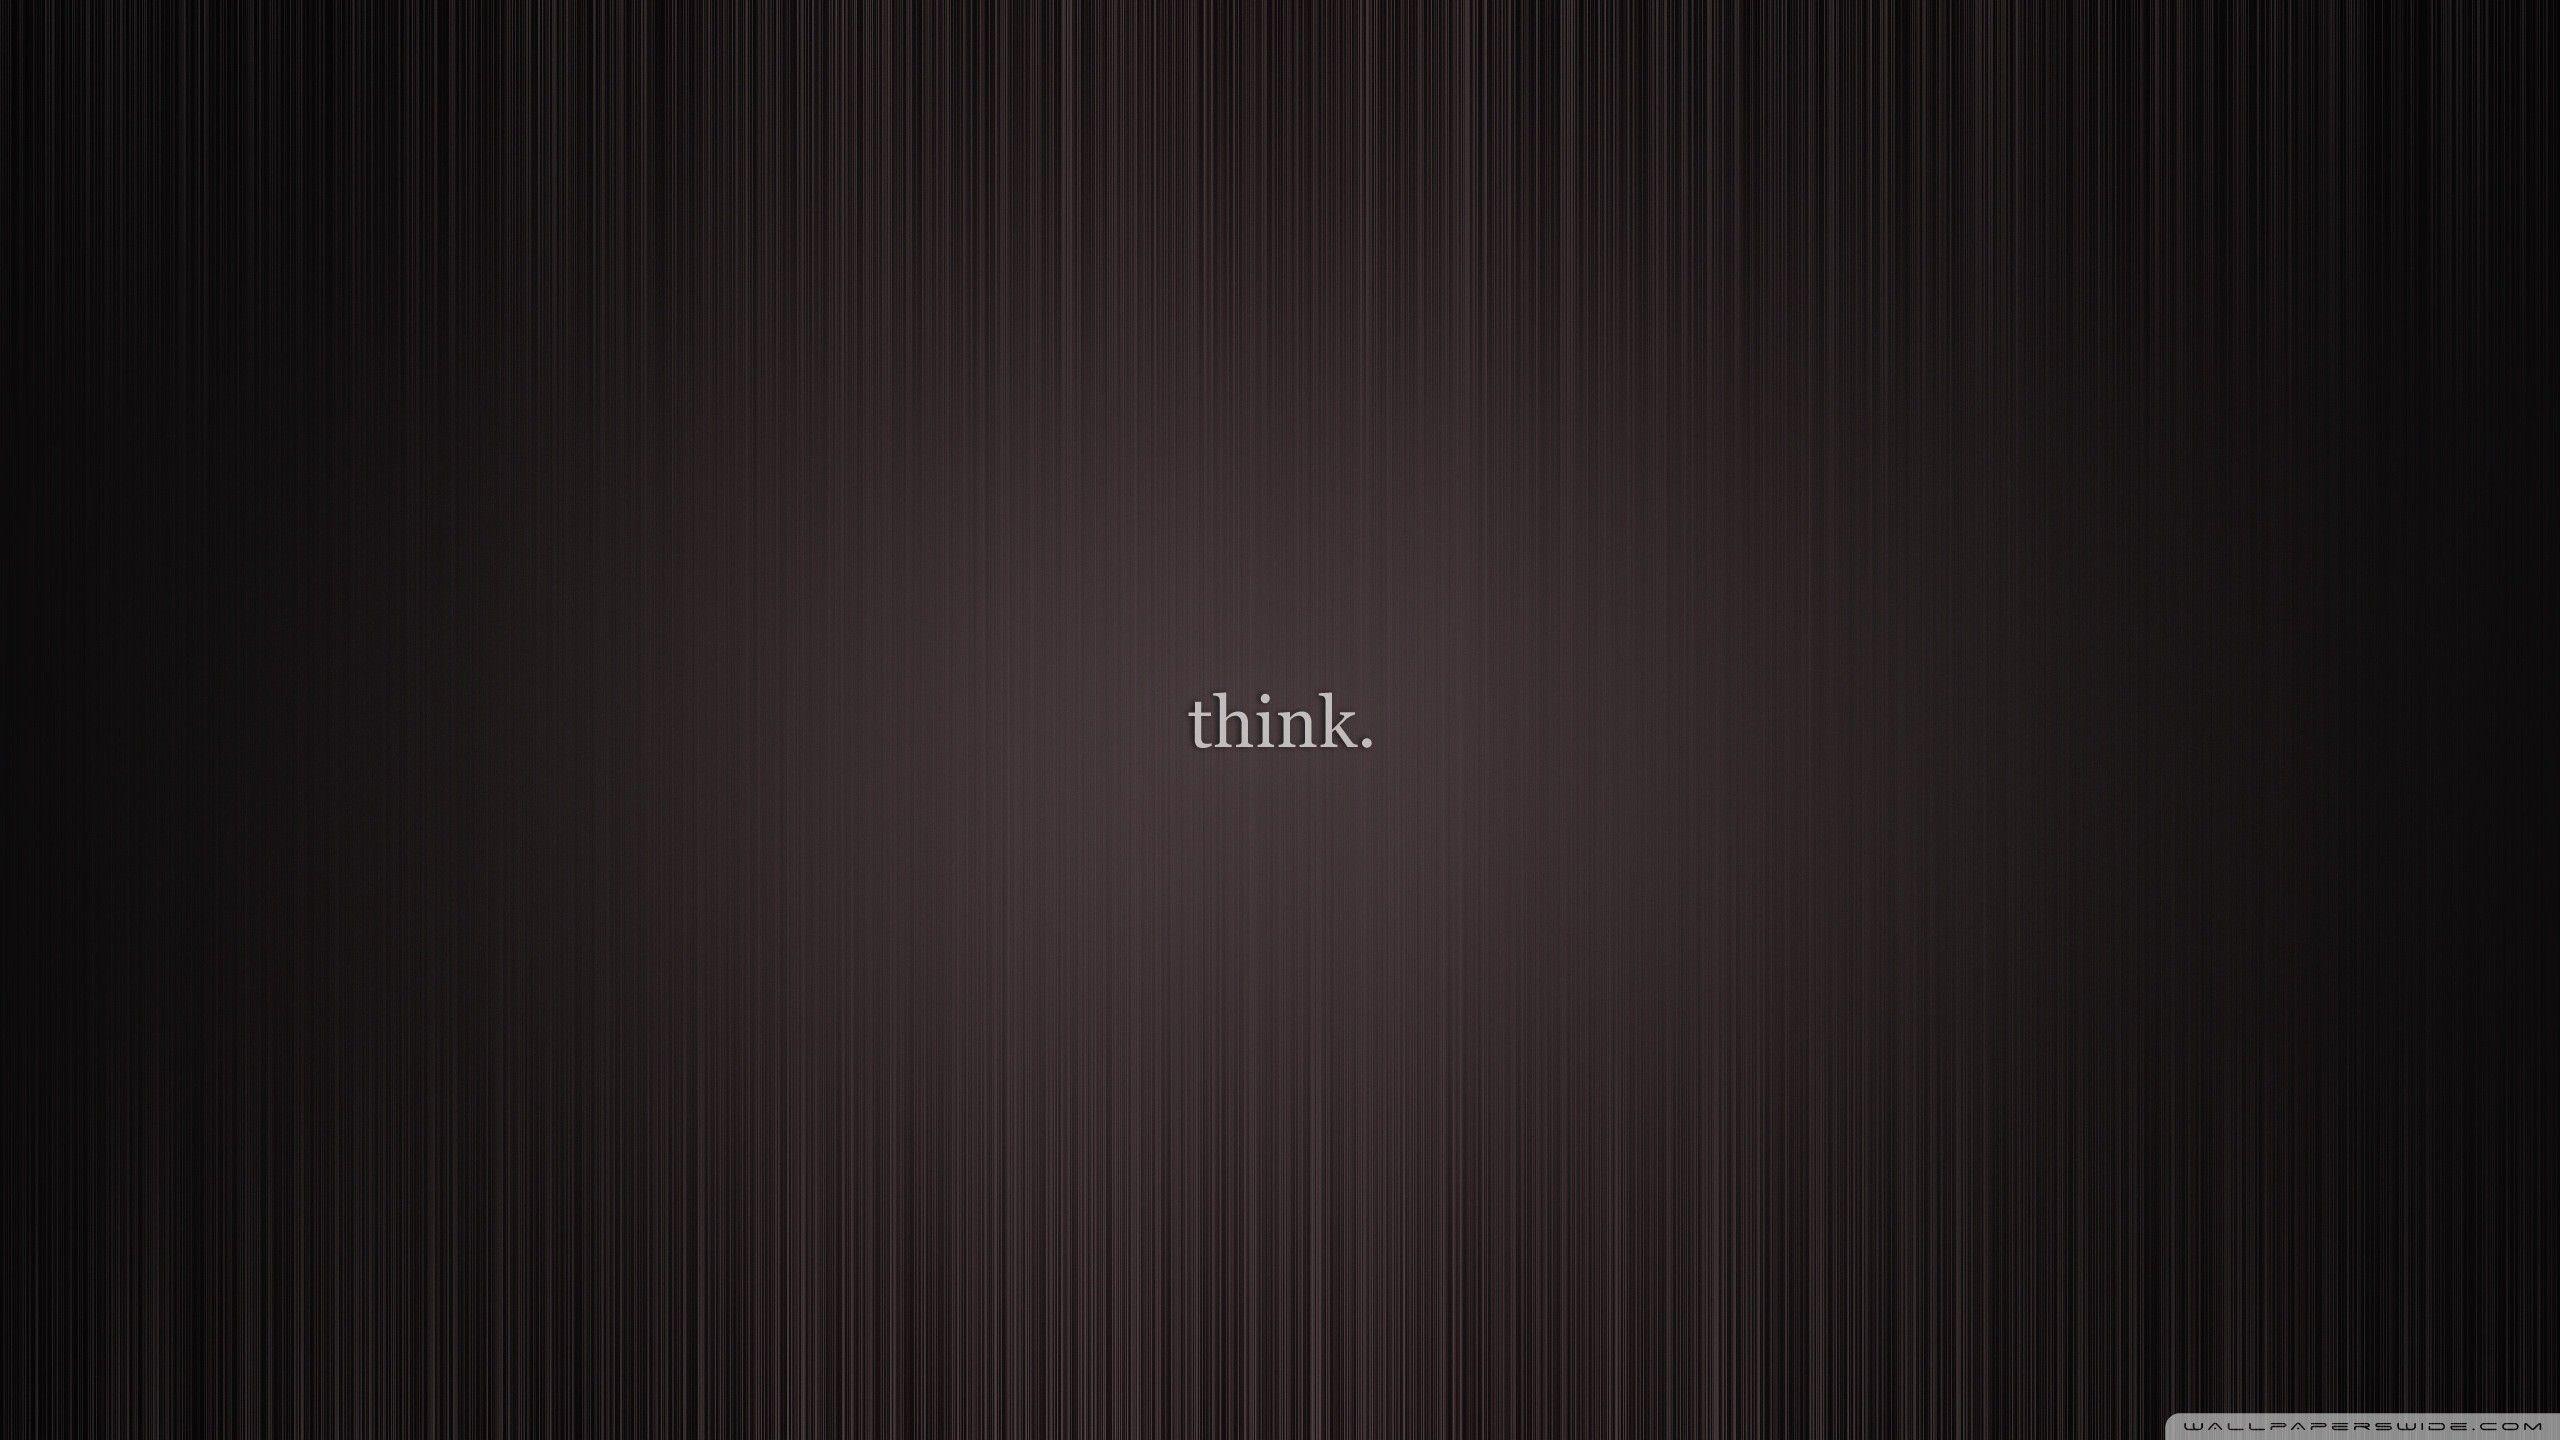 Thinkpad X1 Wallpapers Top Free Thinkpad X1 Backgrounds Wallpaperaccess